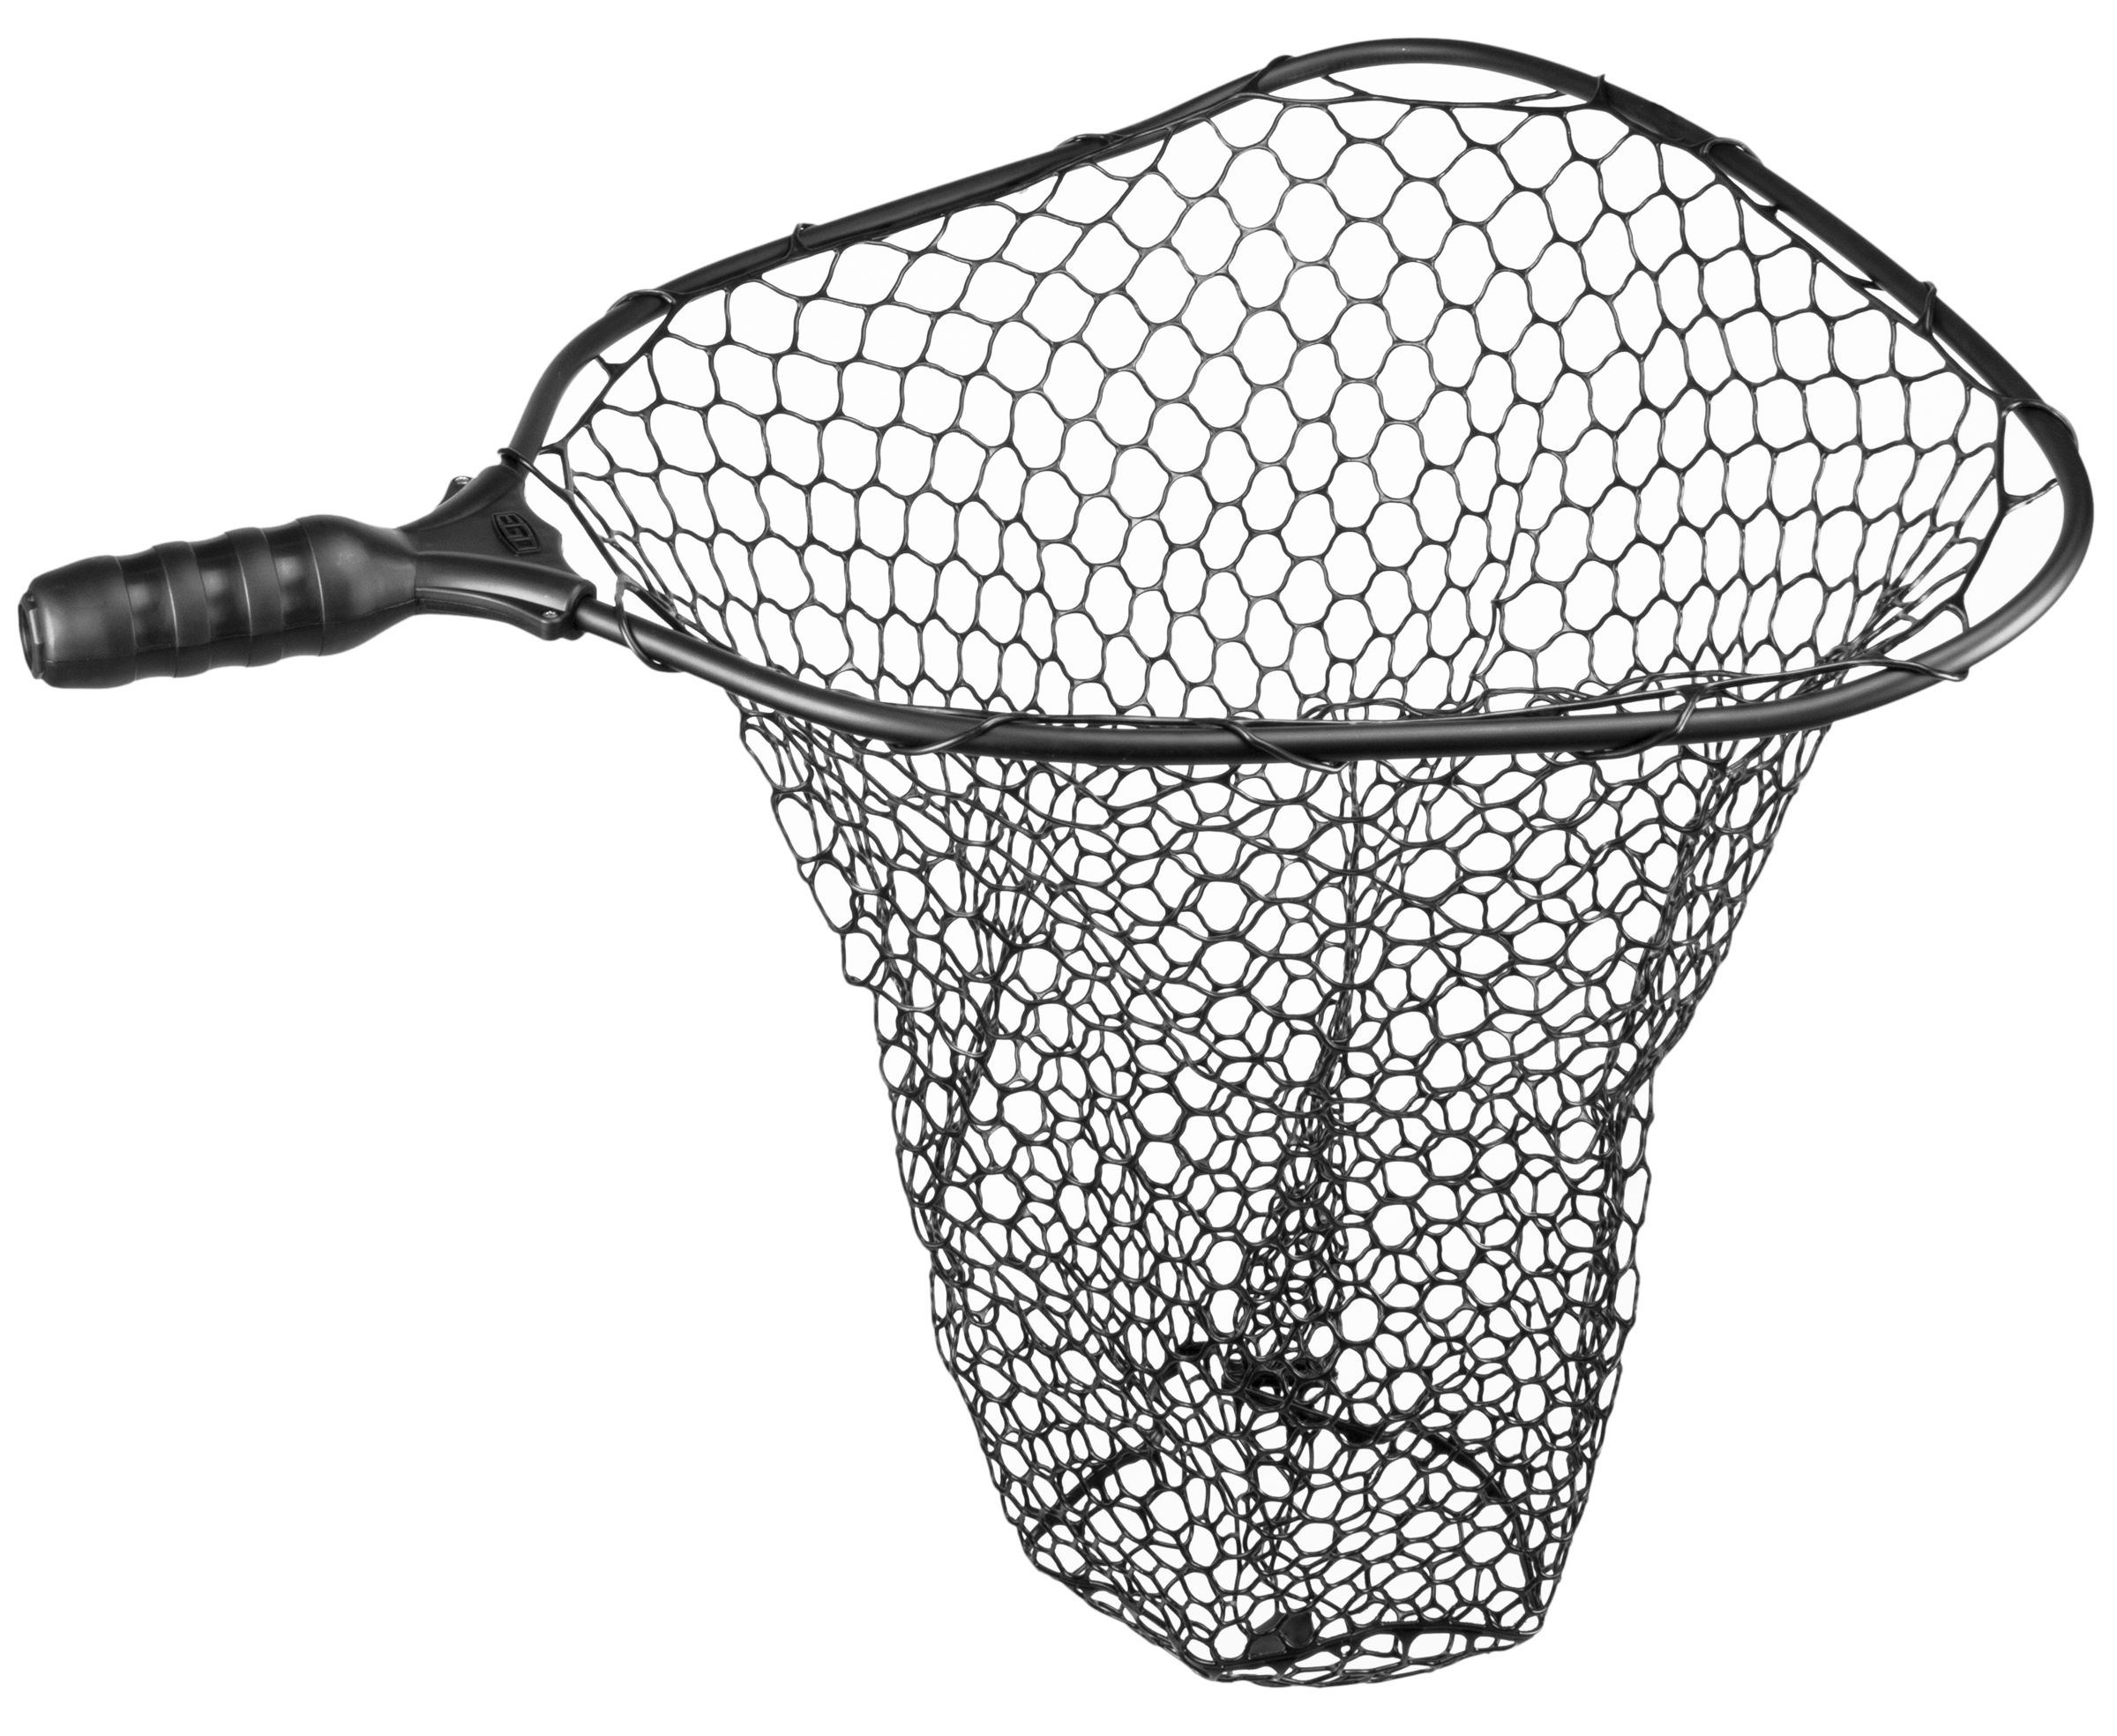 https://cs1.0ps.us/original/opplanet-ego-s2-large-22in-deep-rubber-net-head-black-red-large-22in-72036a-main